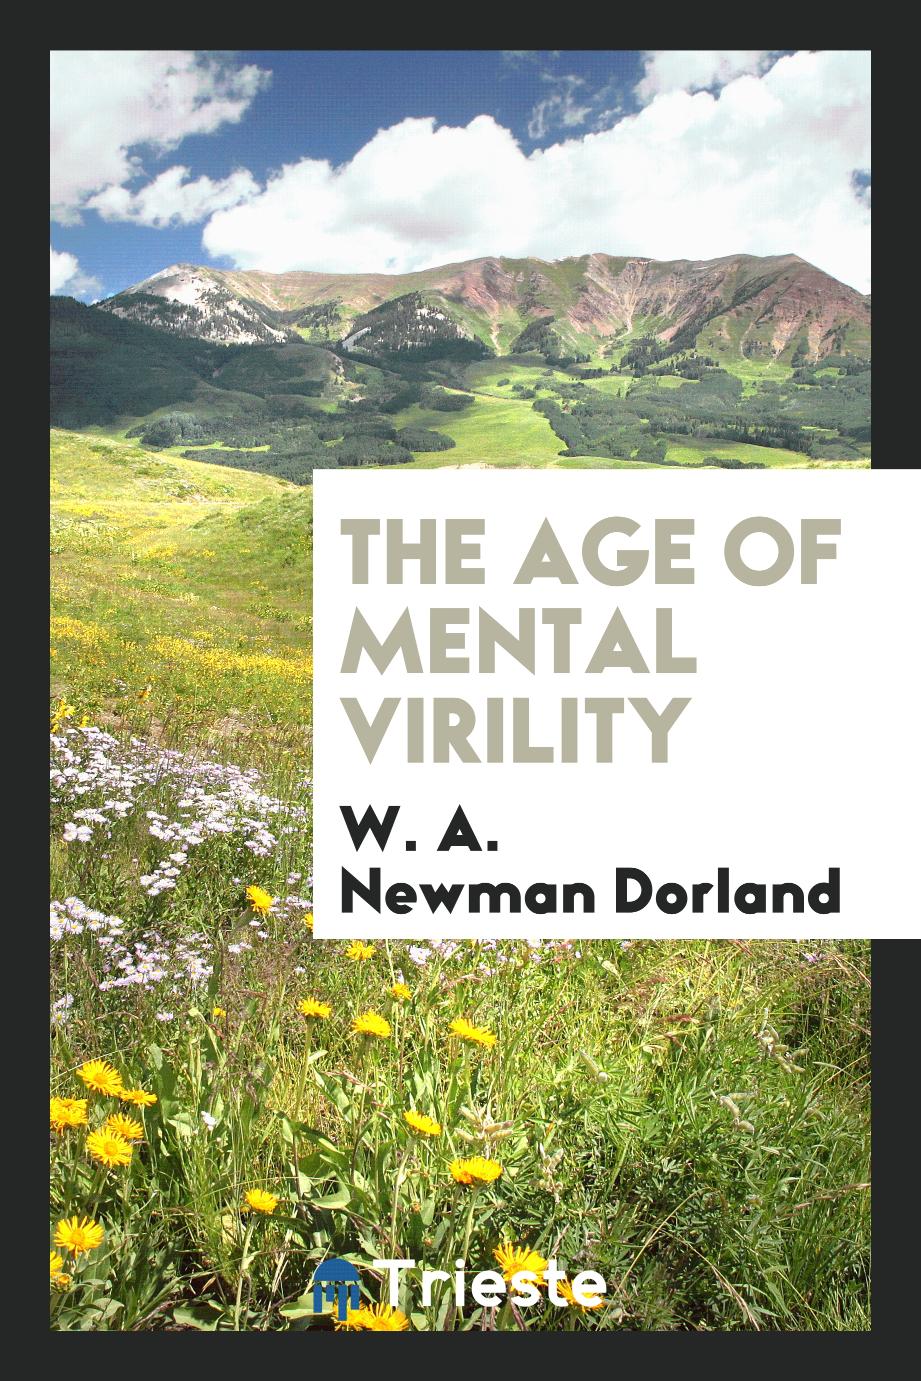 The age of mental virility